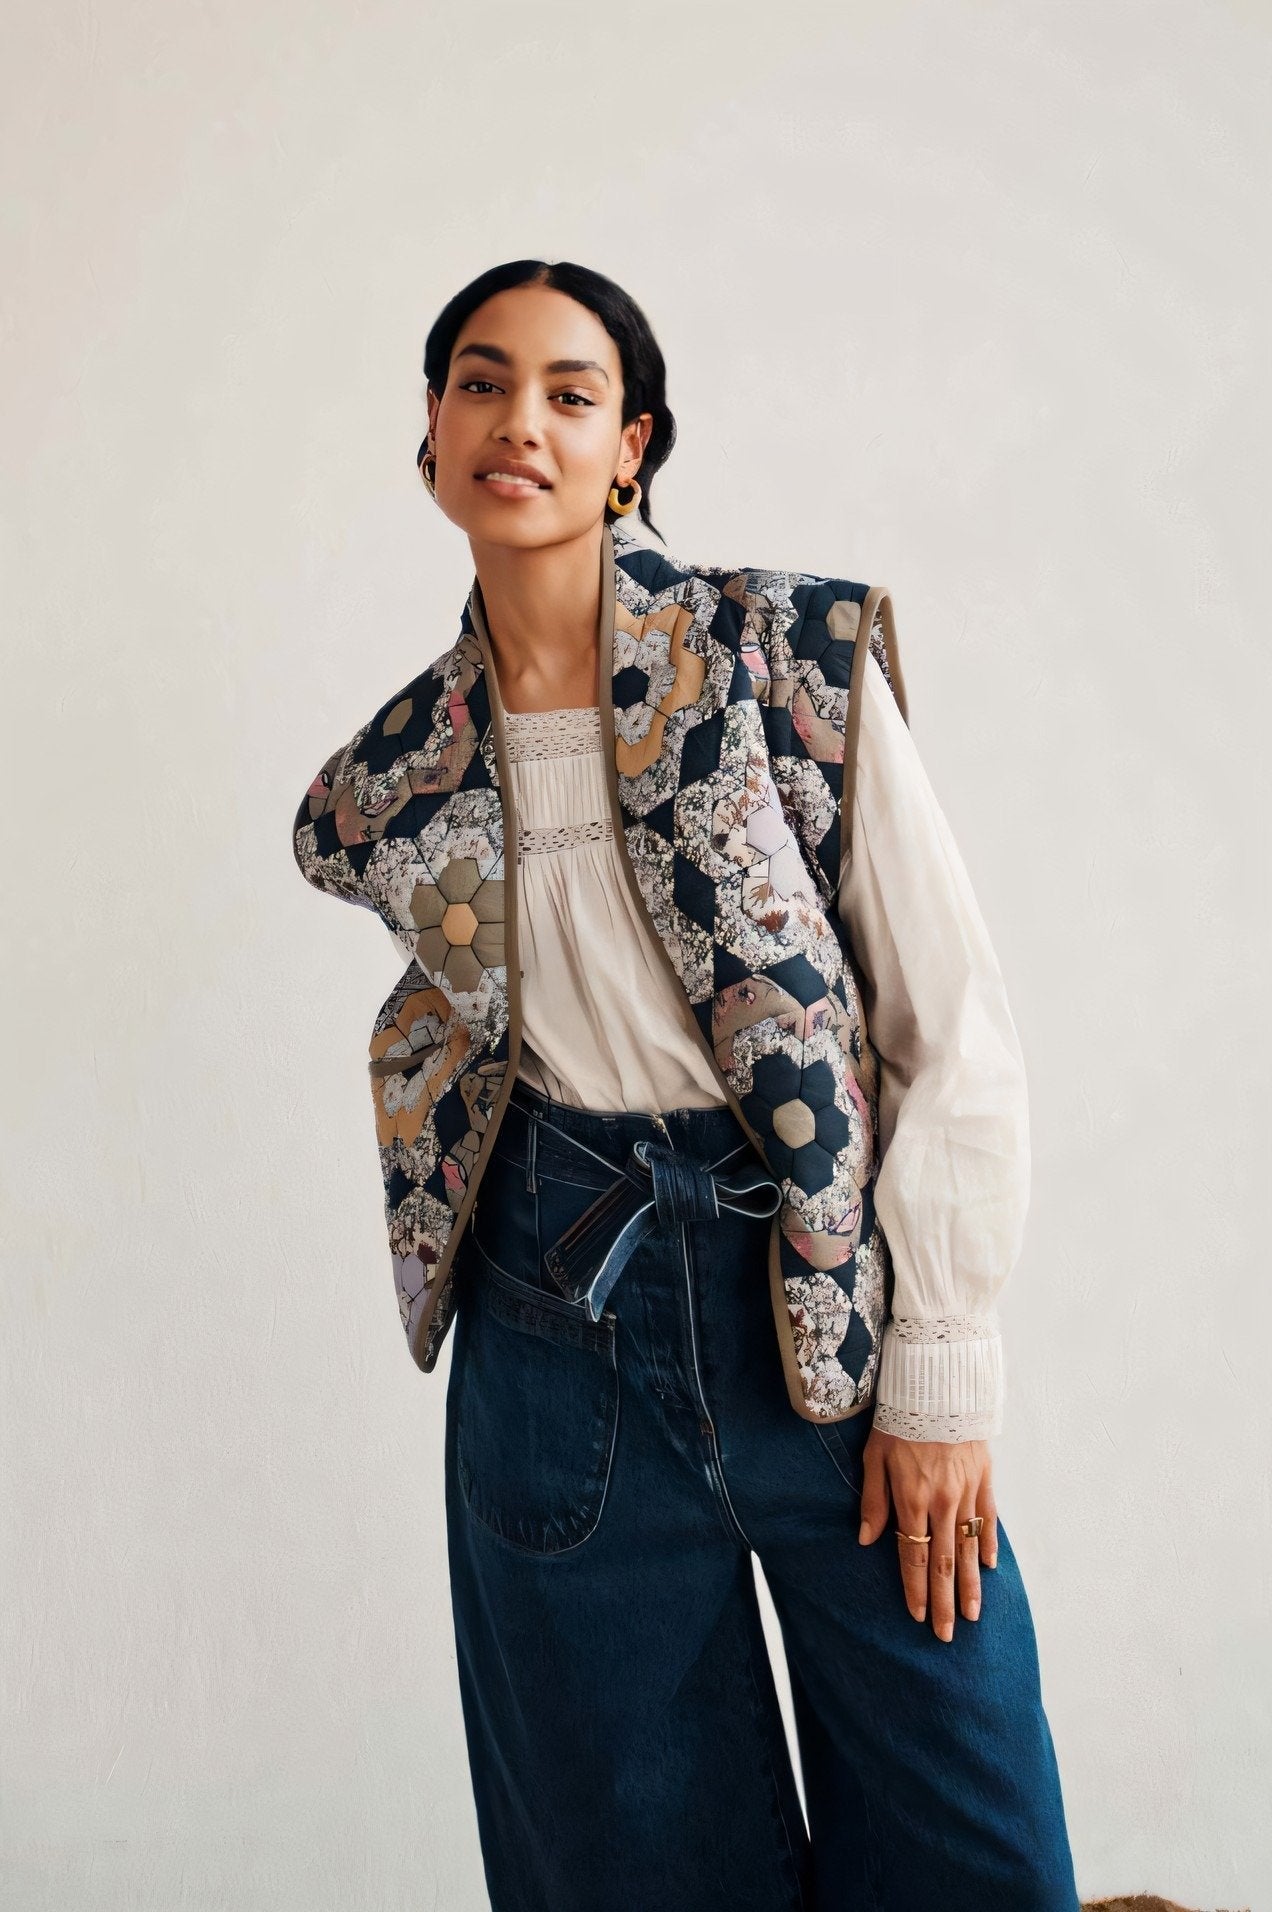 outerwear-Kaylani Floral Printed Convertible Quilted Jacket-SO00611231950-Multi-S - Sunfere